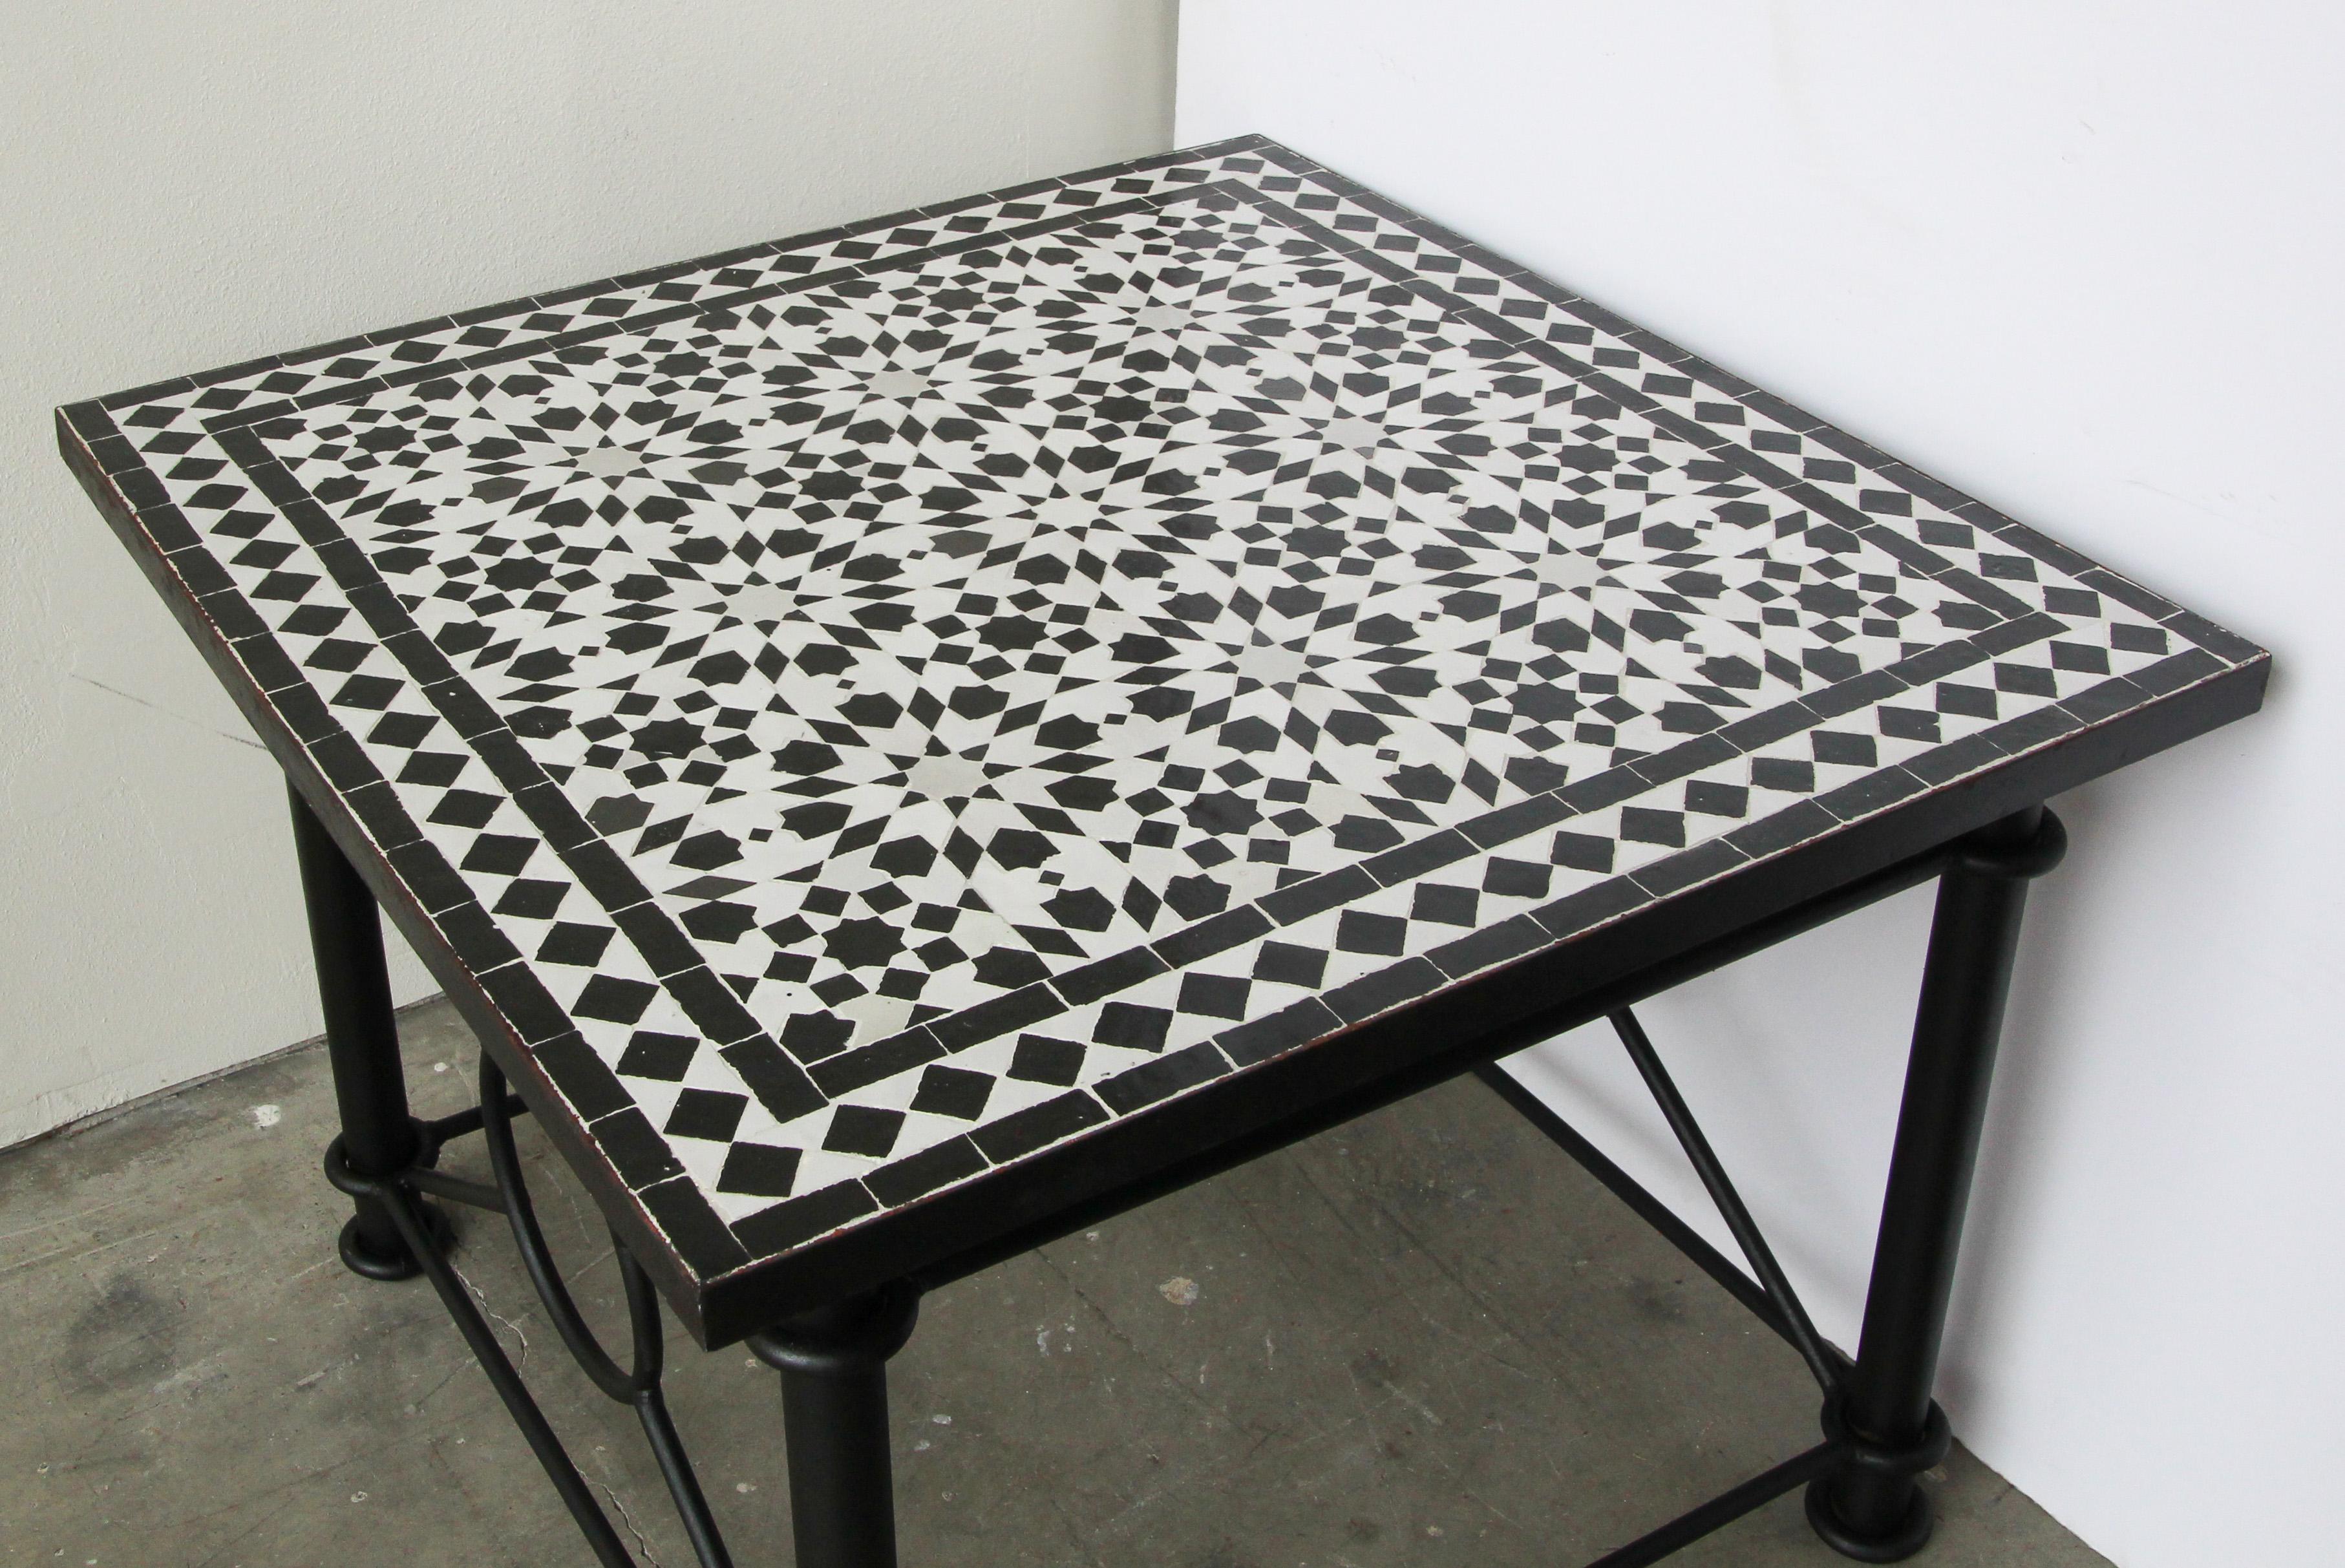 20th Century Moroccan Fez Mosaic Tile Coffee Table in Black and White For Sale